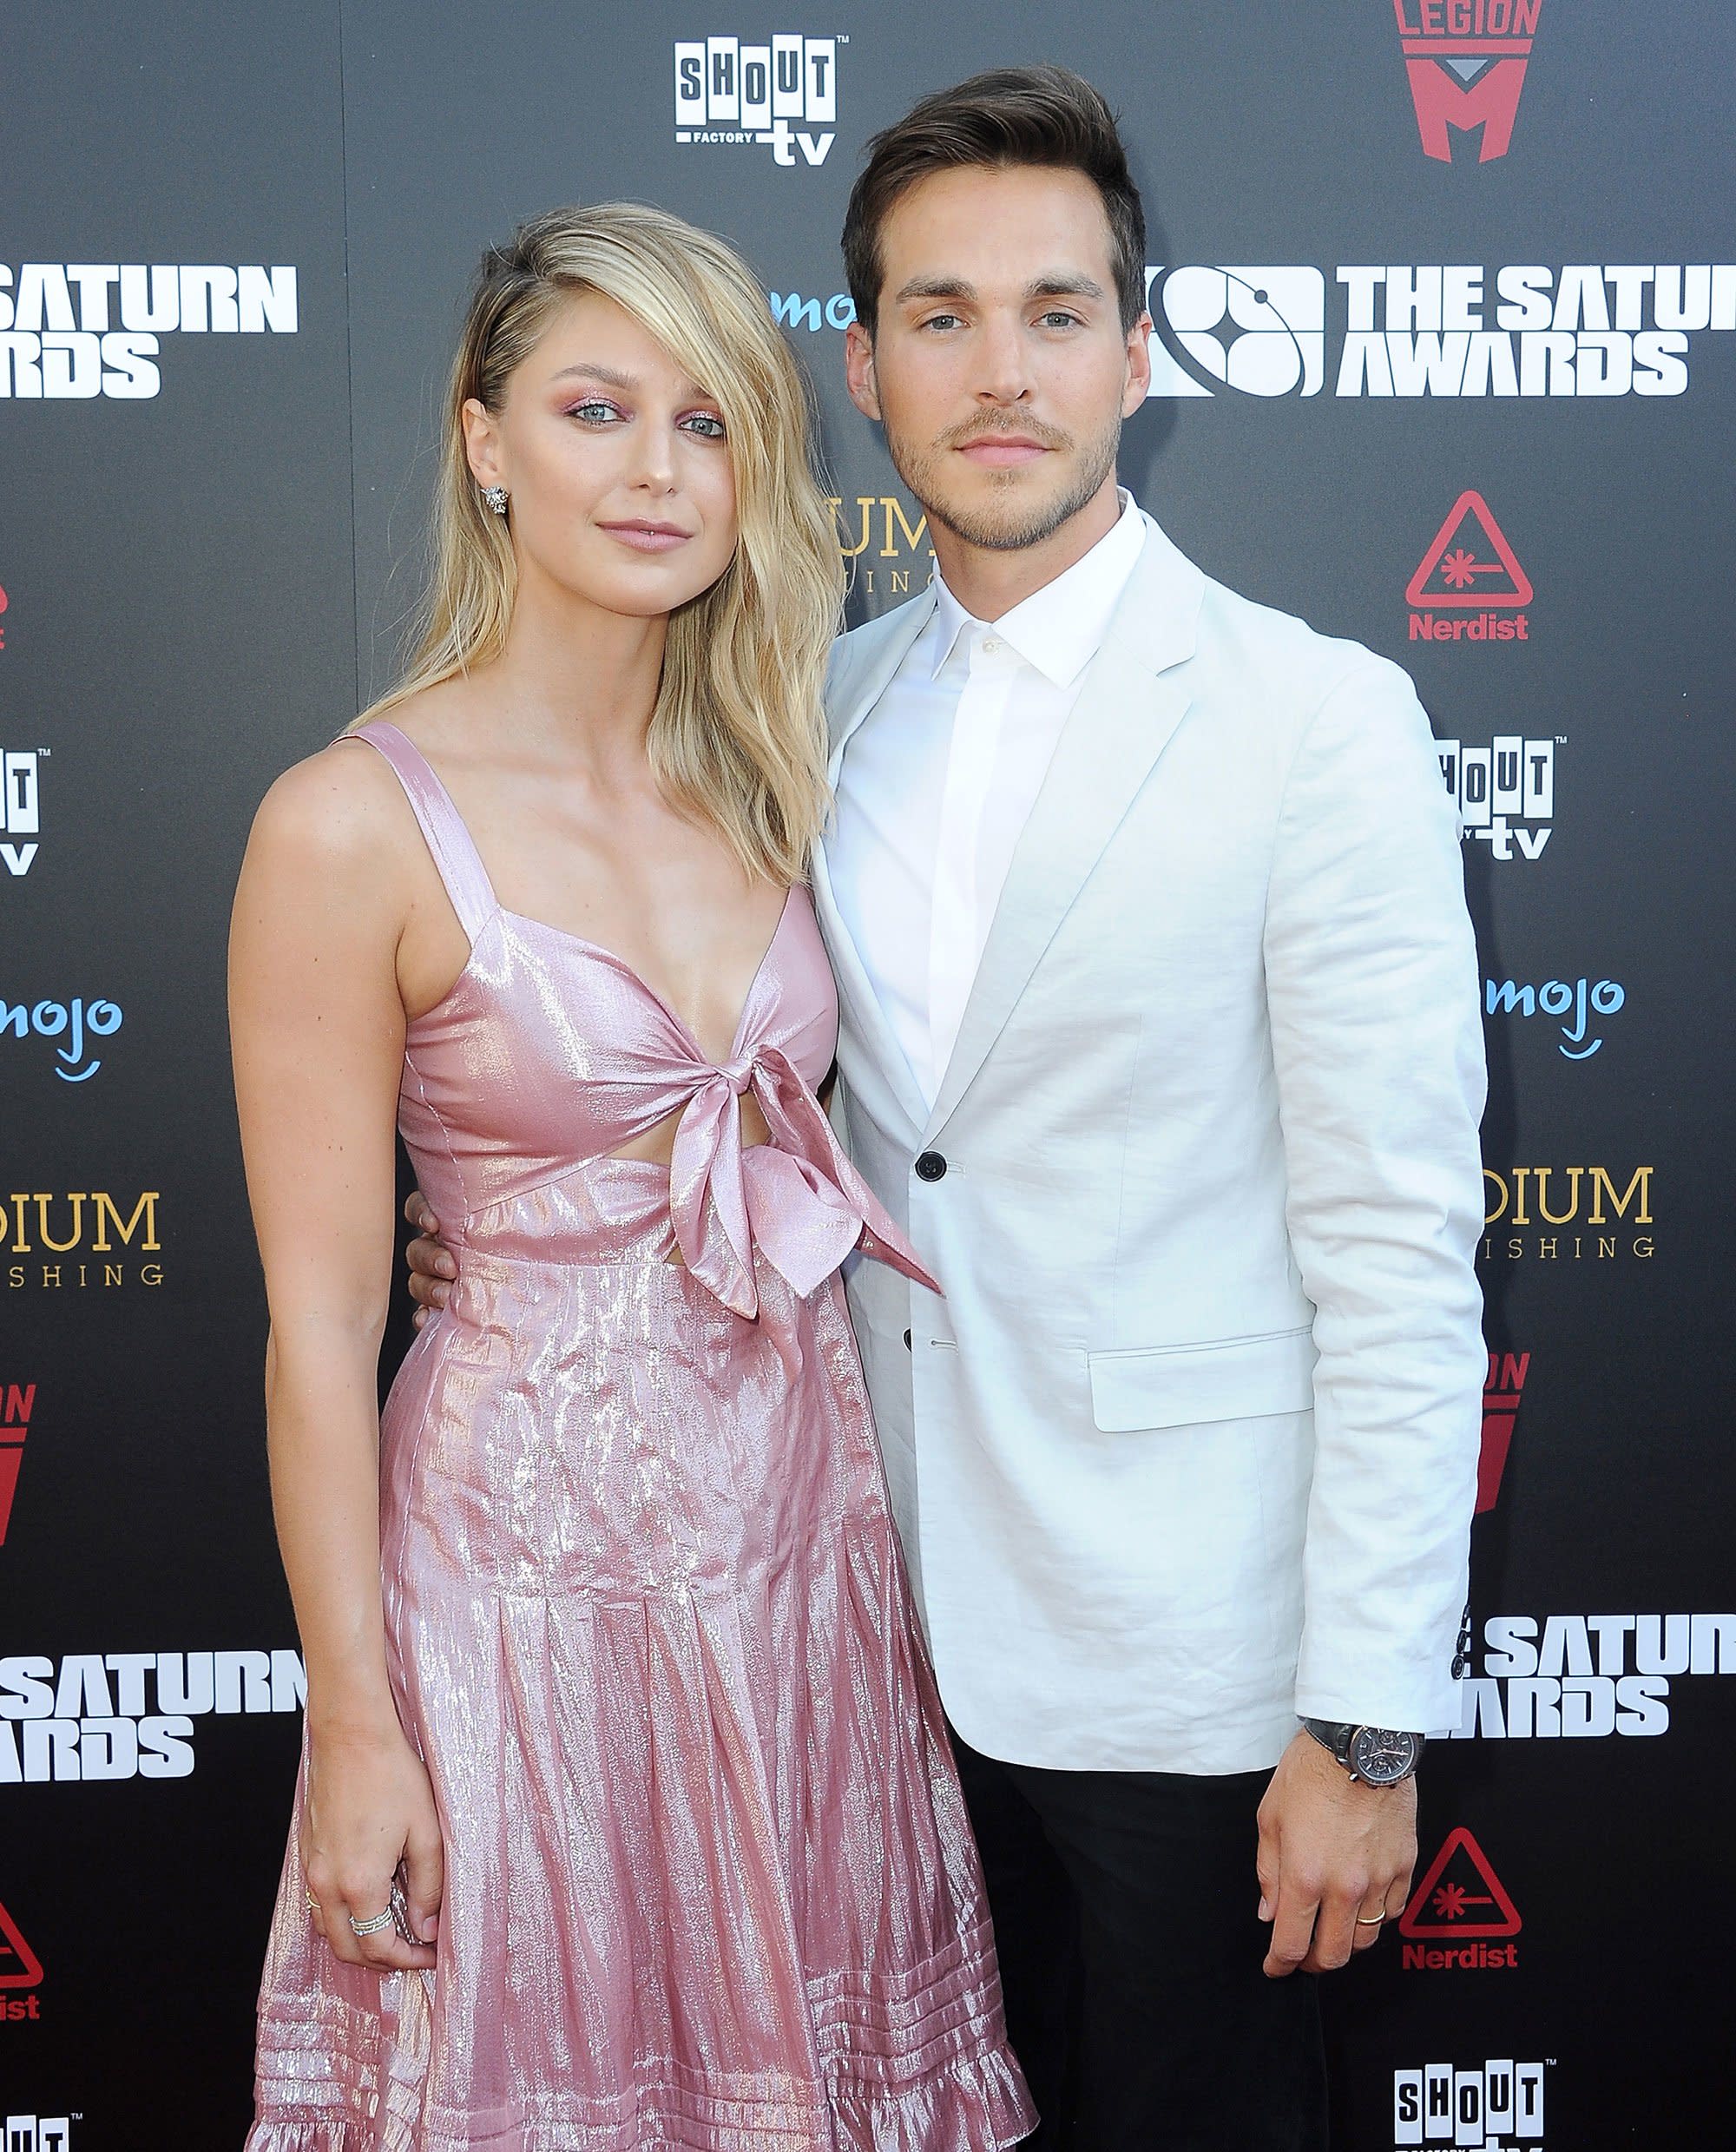 Chris Wood Supports Wife Melissa Benoist After She Reveals She Is a